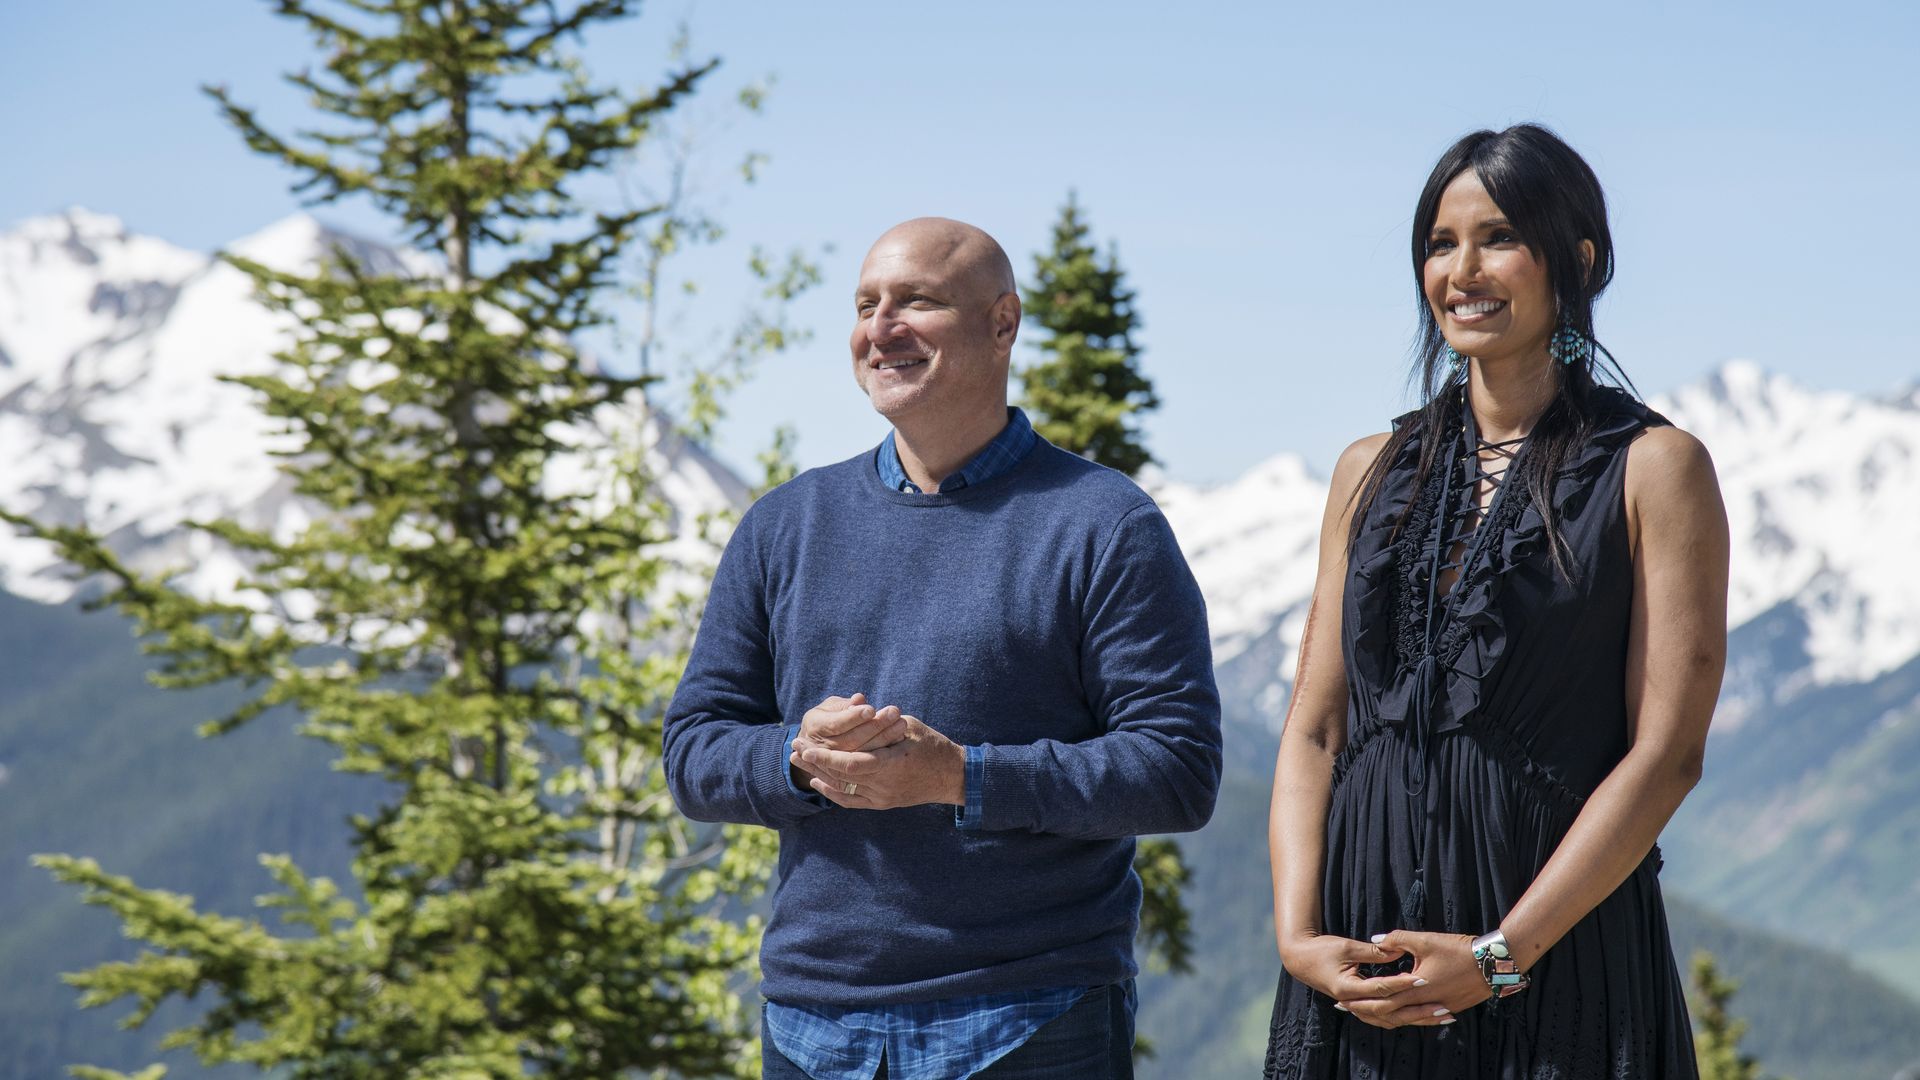 Bravo "Top Chef" hosts Tom Colicchio and Padma Lakshmi in Colorado in 2017. Photo: Paul Trantow/Bravo/NBCUniversal via Getty Images